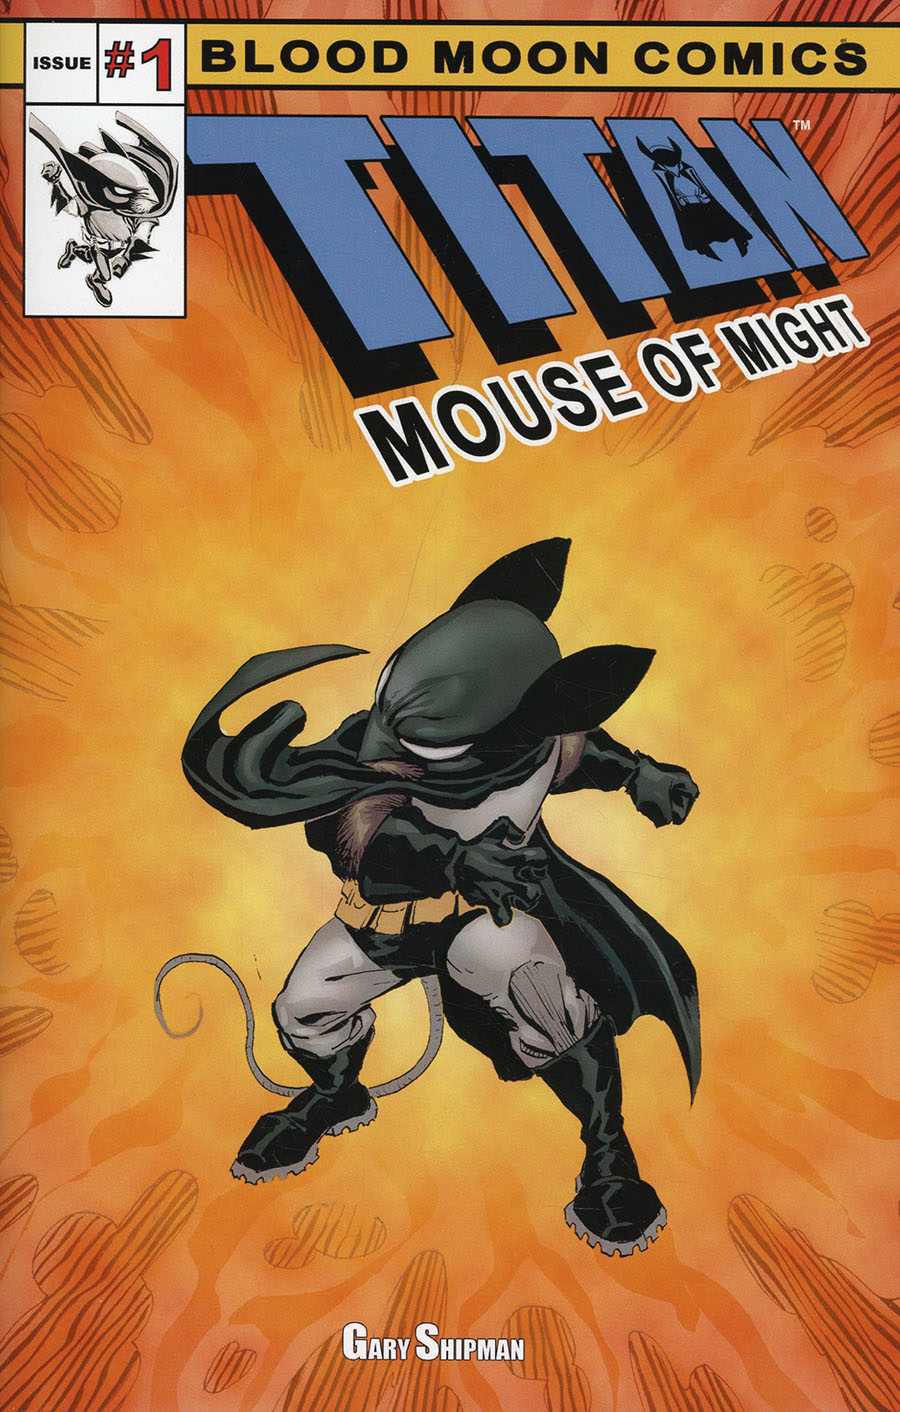 Titan Mouse Of Might #1